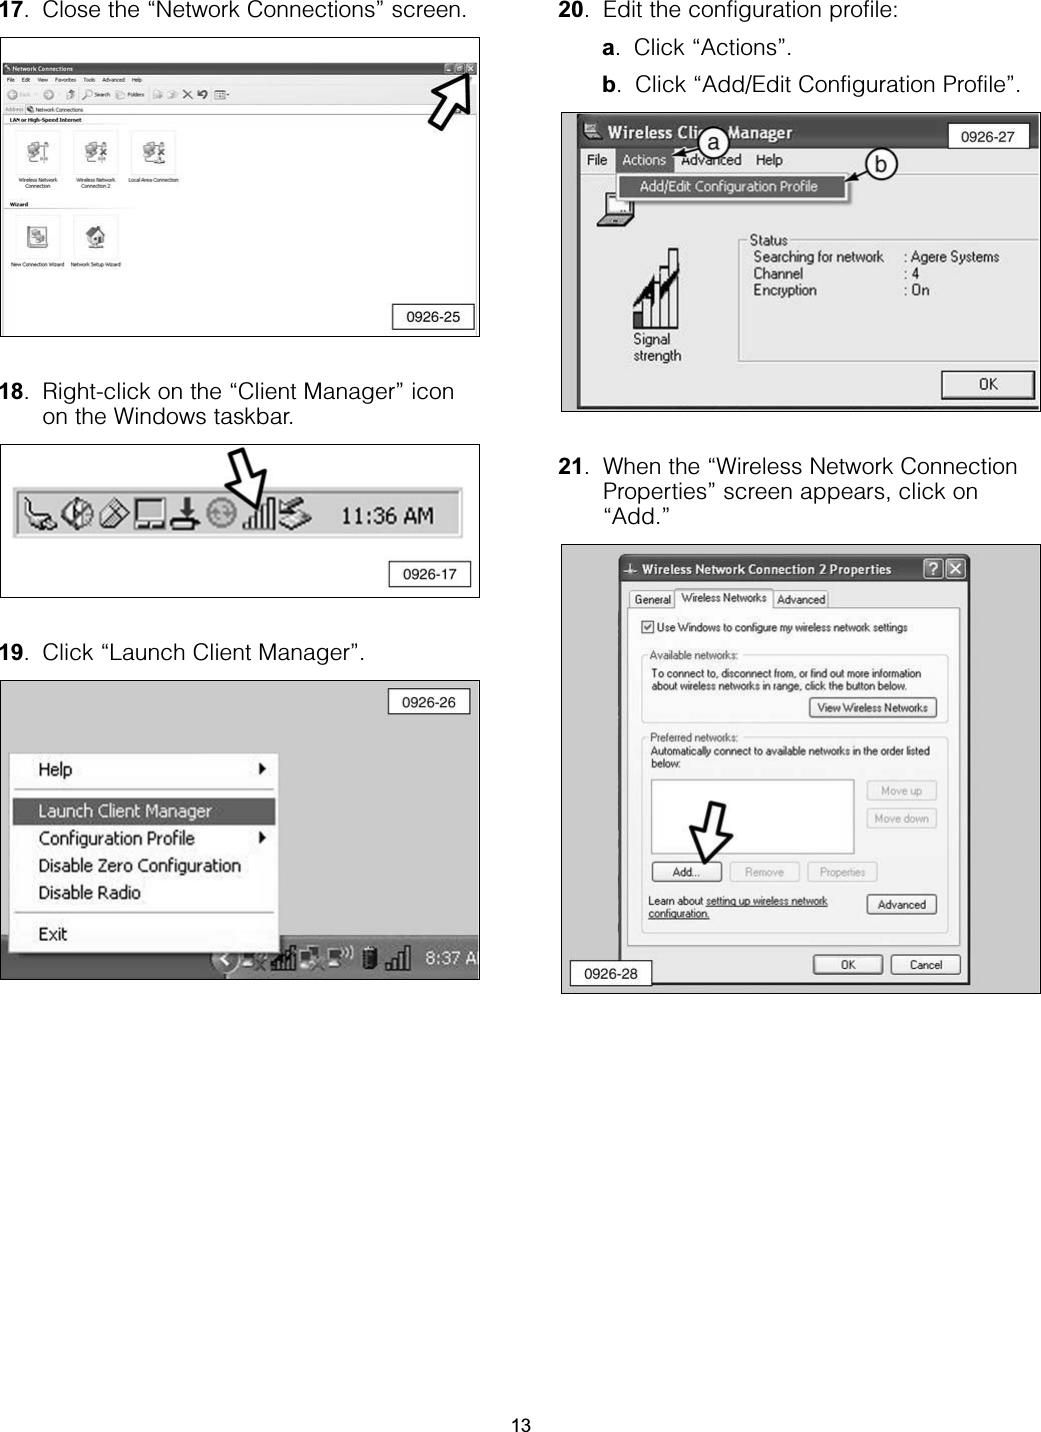 17. Close the “Network Connections” screen.18. Right-click on the “Client Manager” iconon the Windows taskbar. 19. Click “Launch Client Manager”.20. Edit the configuration profile:a. Click “Actions”. b. Click “Add/Edit Configuration Profile”.21. When the “Wireless Network ConnectionProperties” screen appears, click on“Add.”13